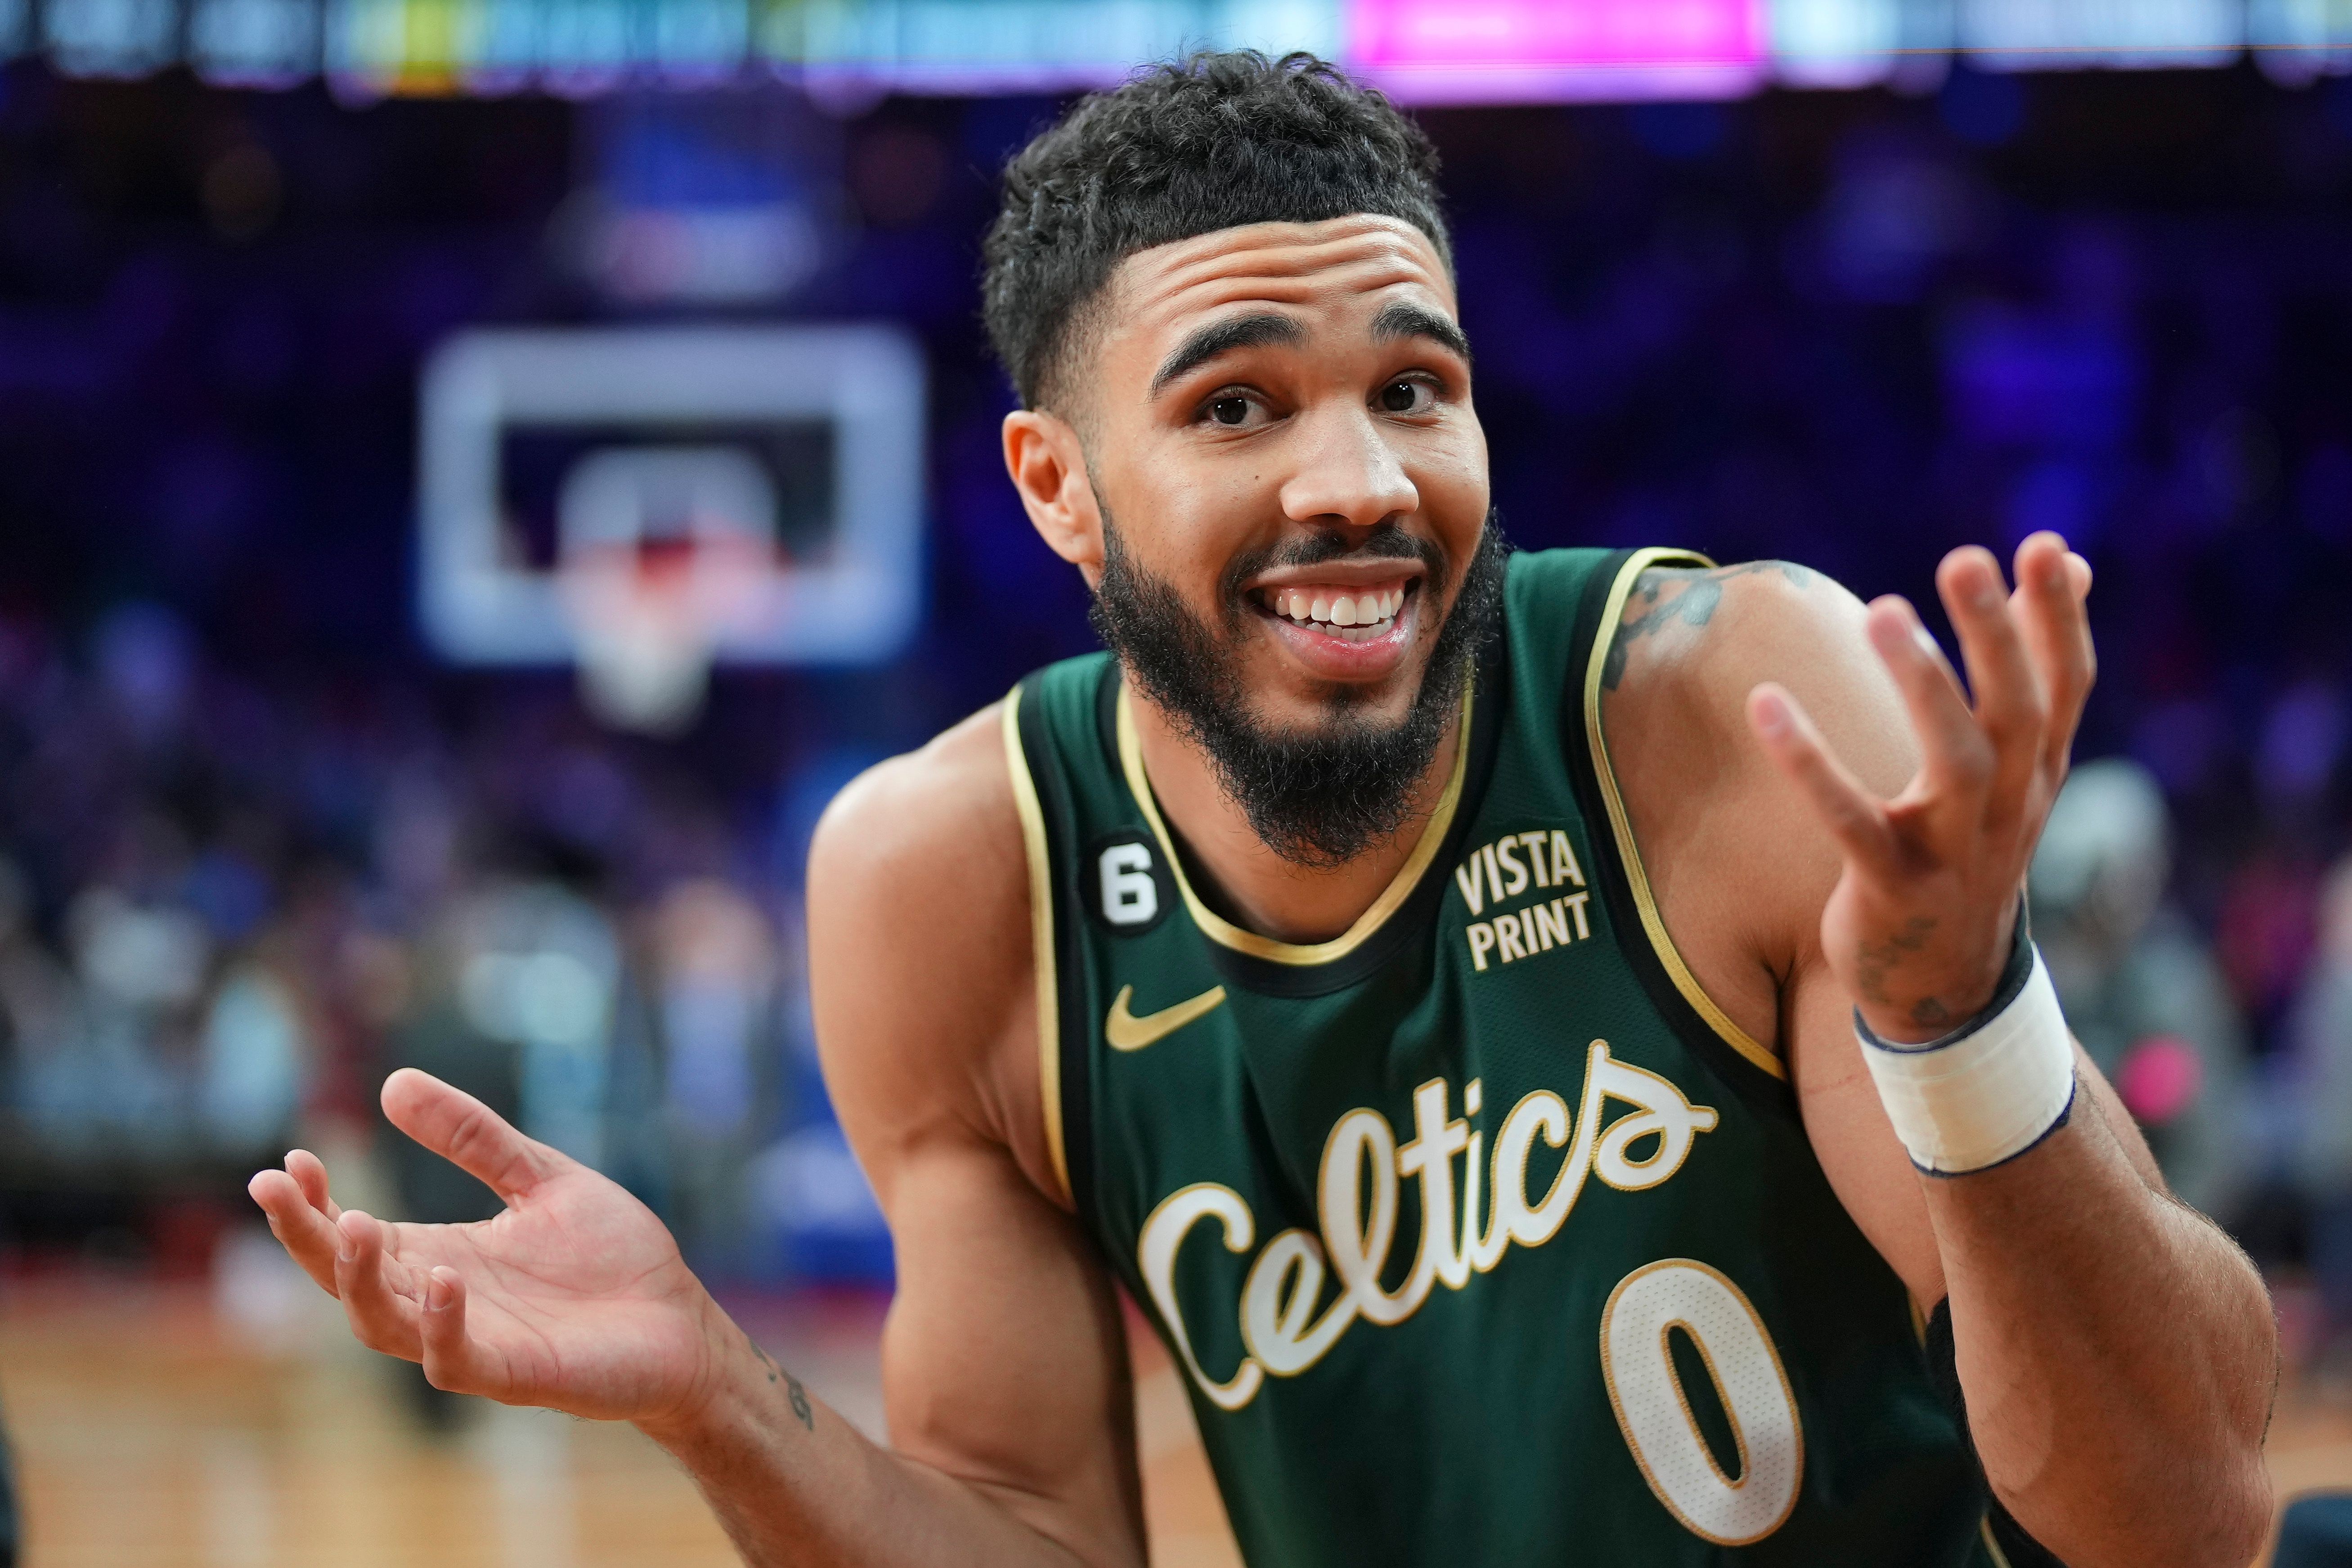 Jayson Tatum after the game against the Philadelphia 76ers at the Wells Fargo Center on February 25, 2023, in Philadelphia, Pennsylvania. | Source: Getty Images